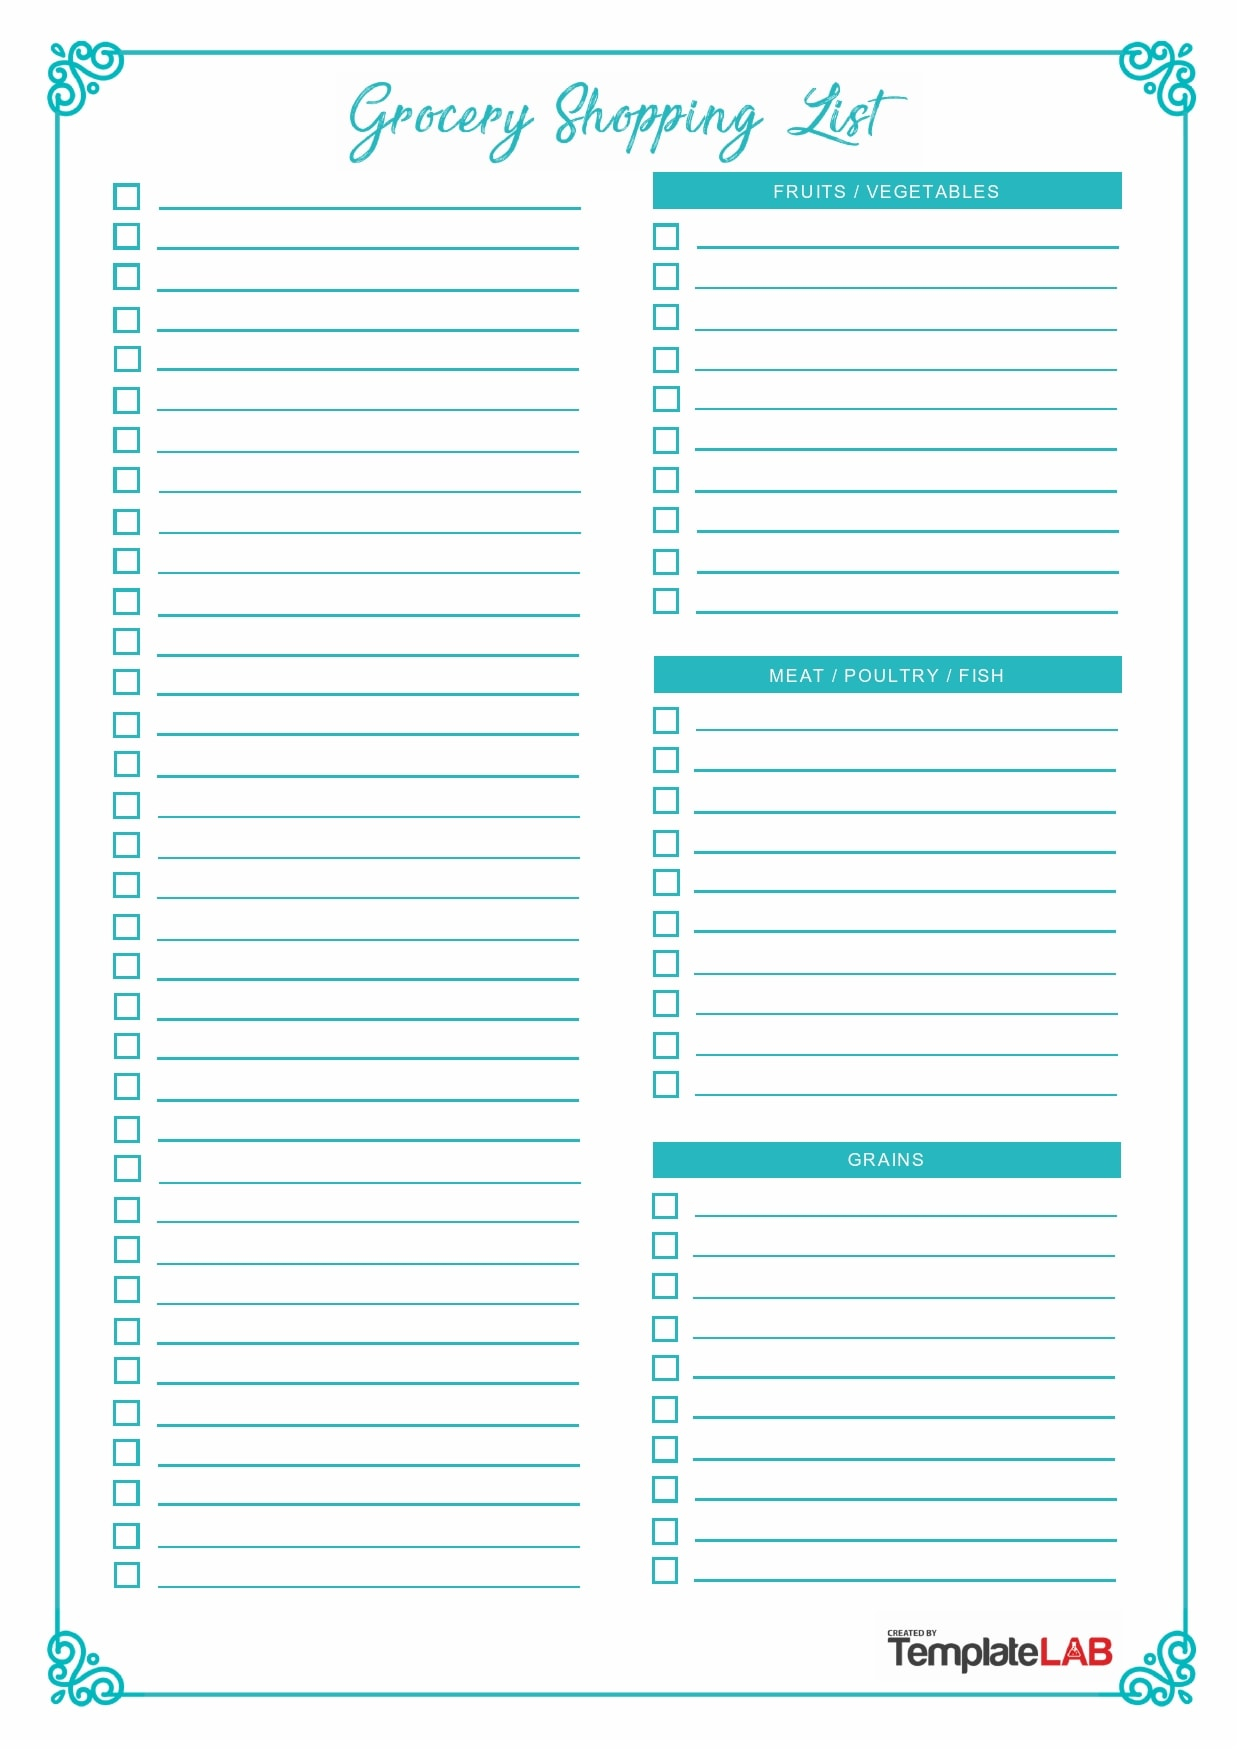 10 Useful Grocery List Templates (Shopping Lists) – PrintableTemplates Regarding Blank Grocery Shopping List Template